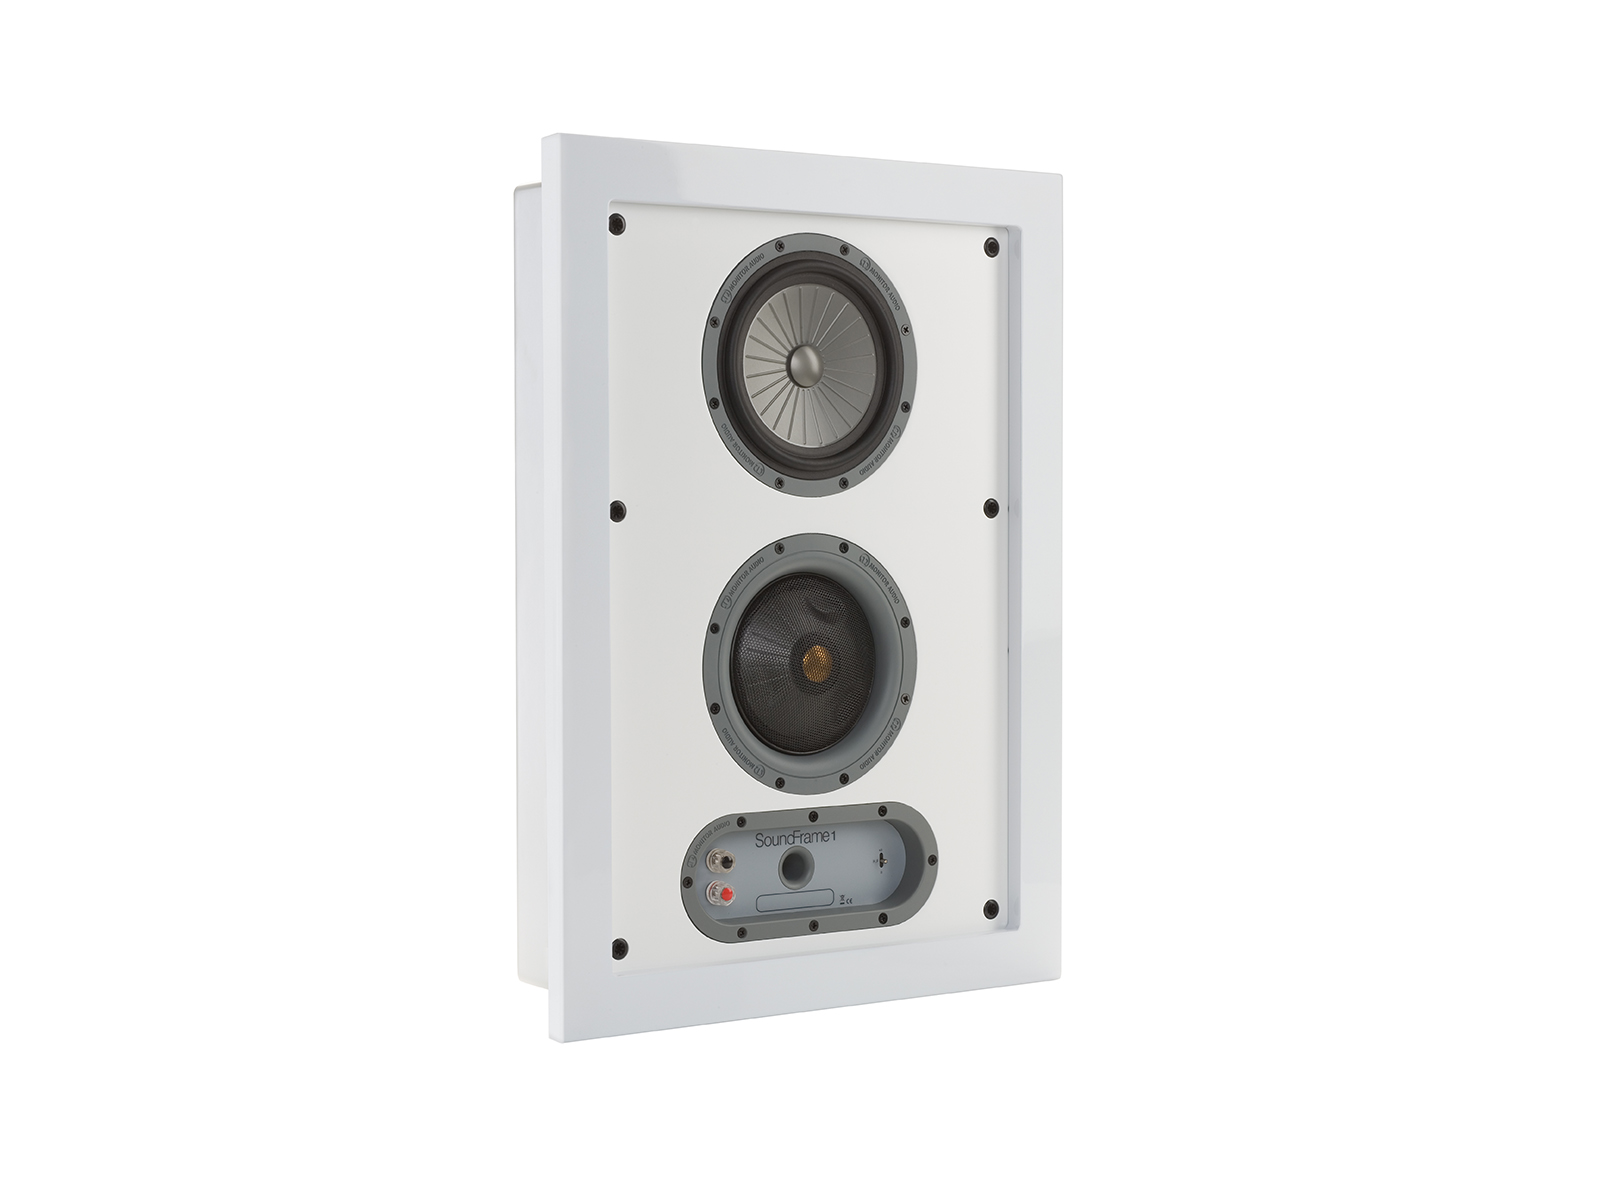 SoundFrame SF1, in-wall speakers, grille-less, with a high gloss white lacquer finish.